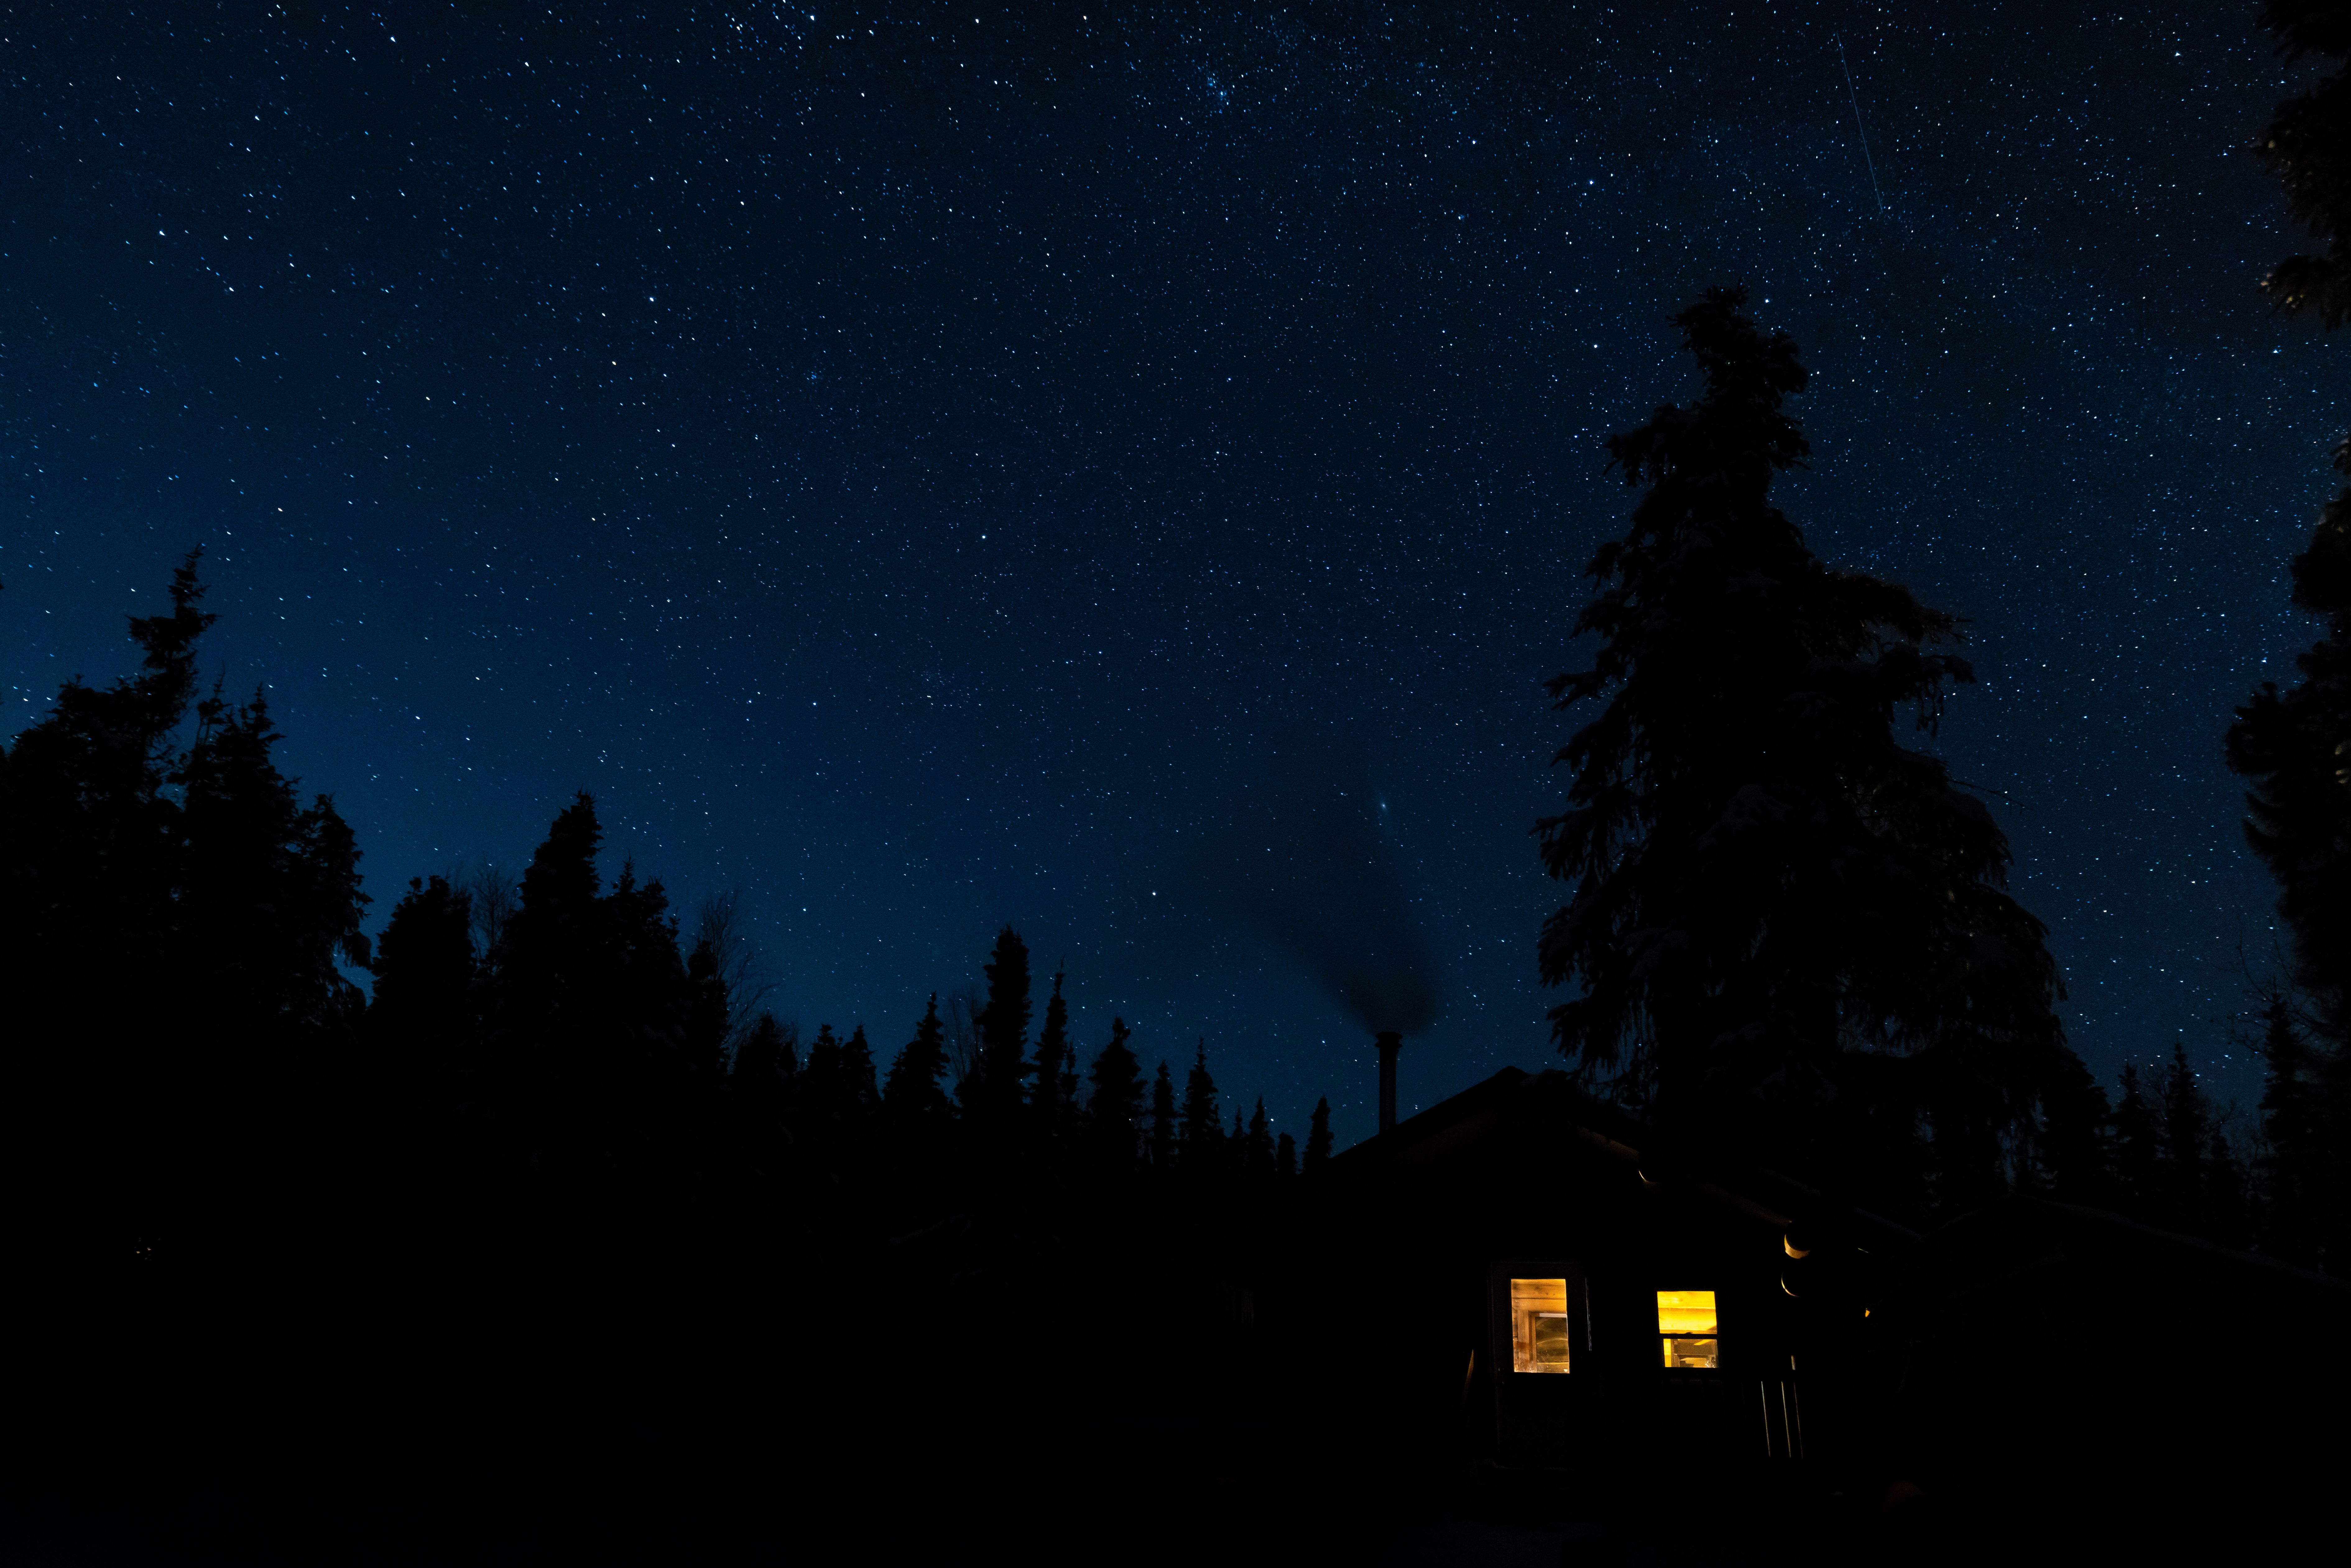 small house, trees, night, dark, shine, light, forest, silhouettes, lodge